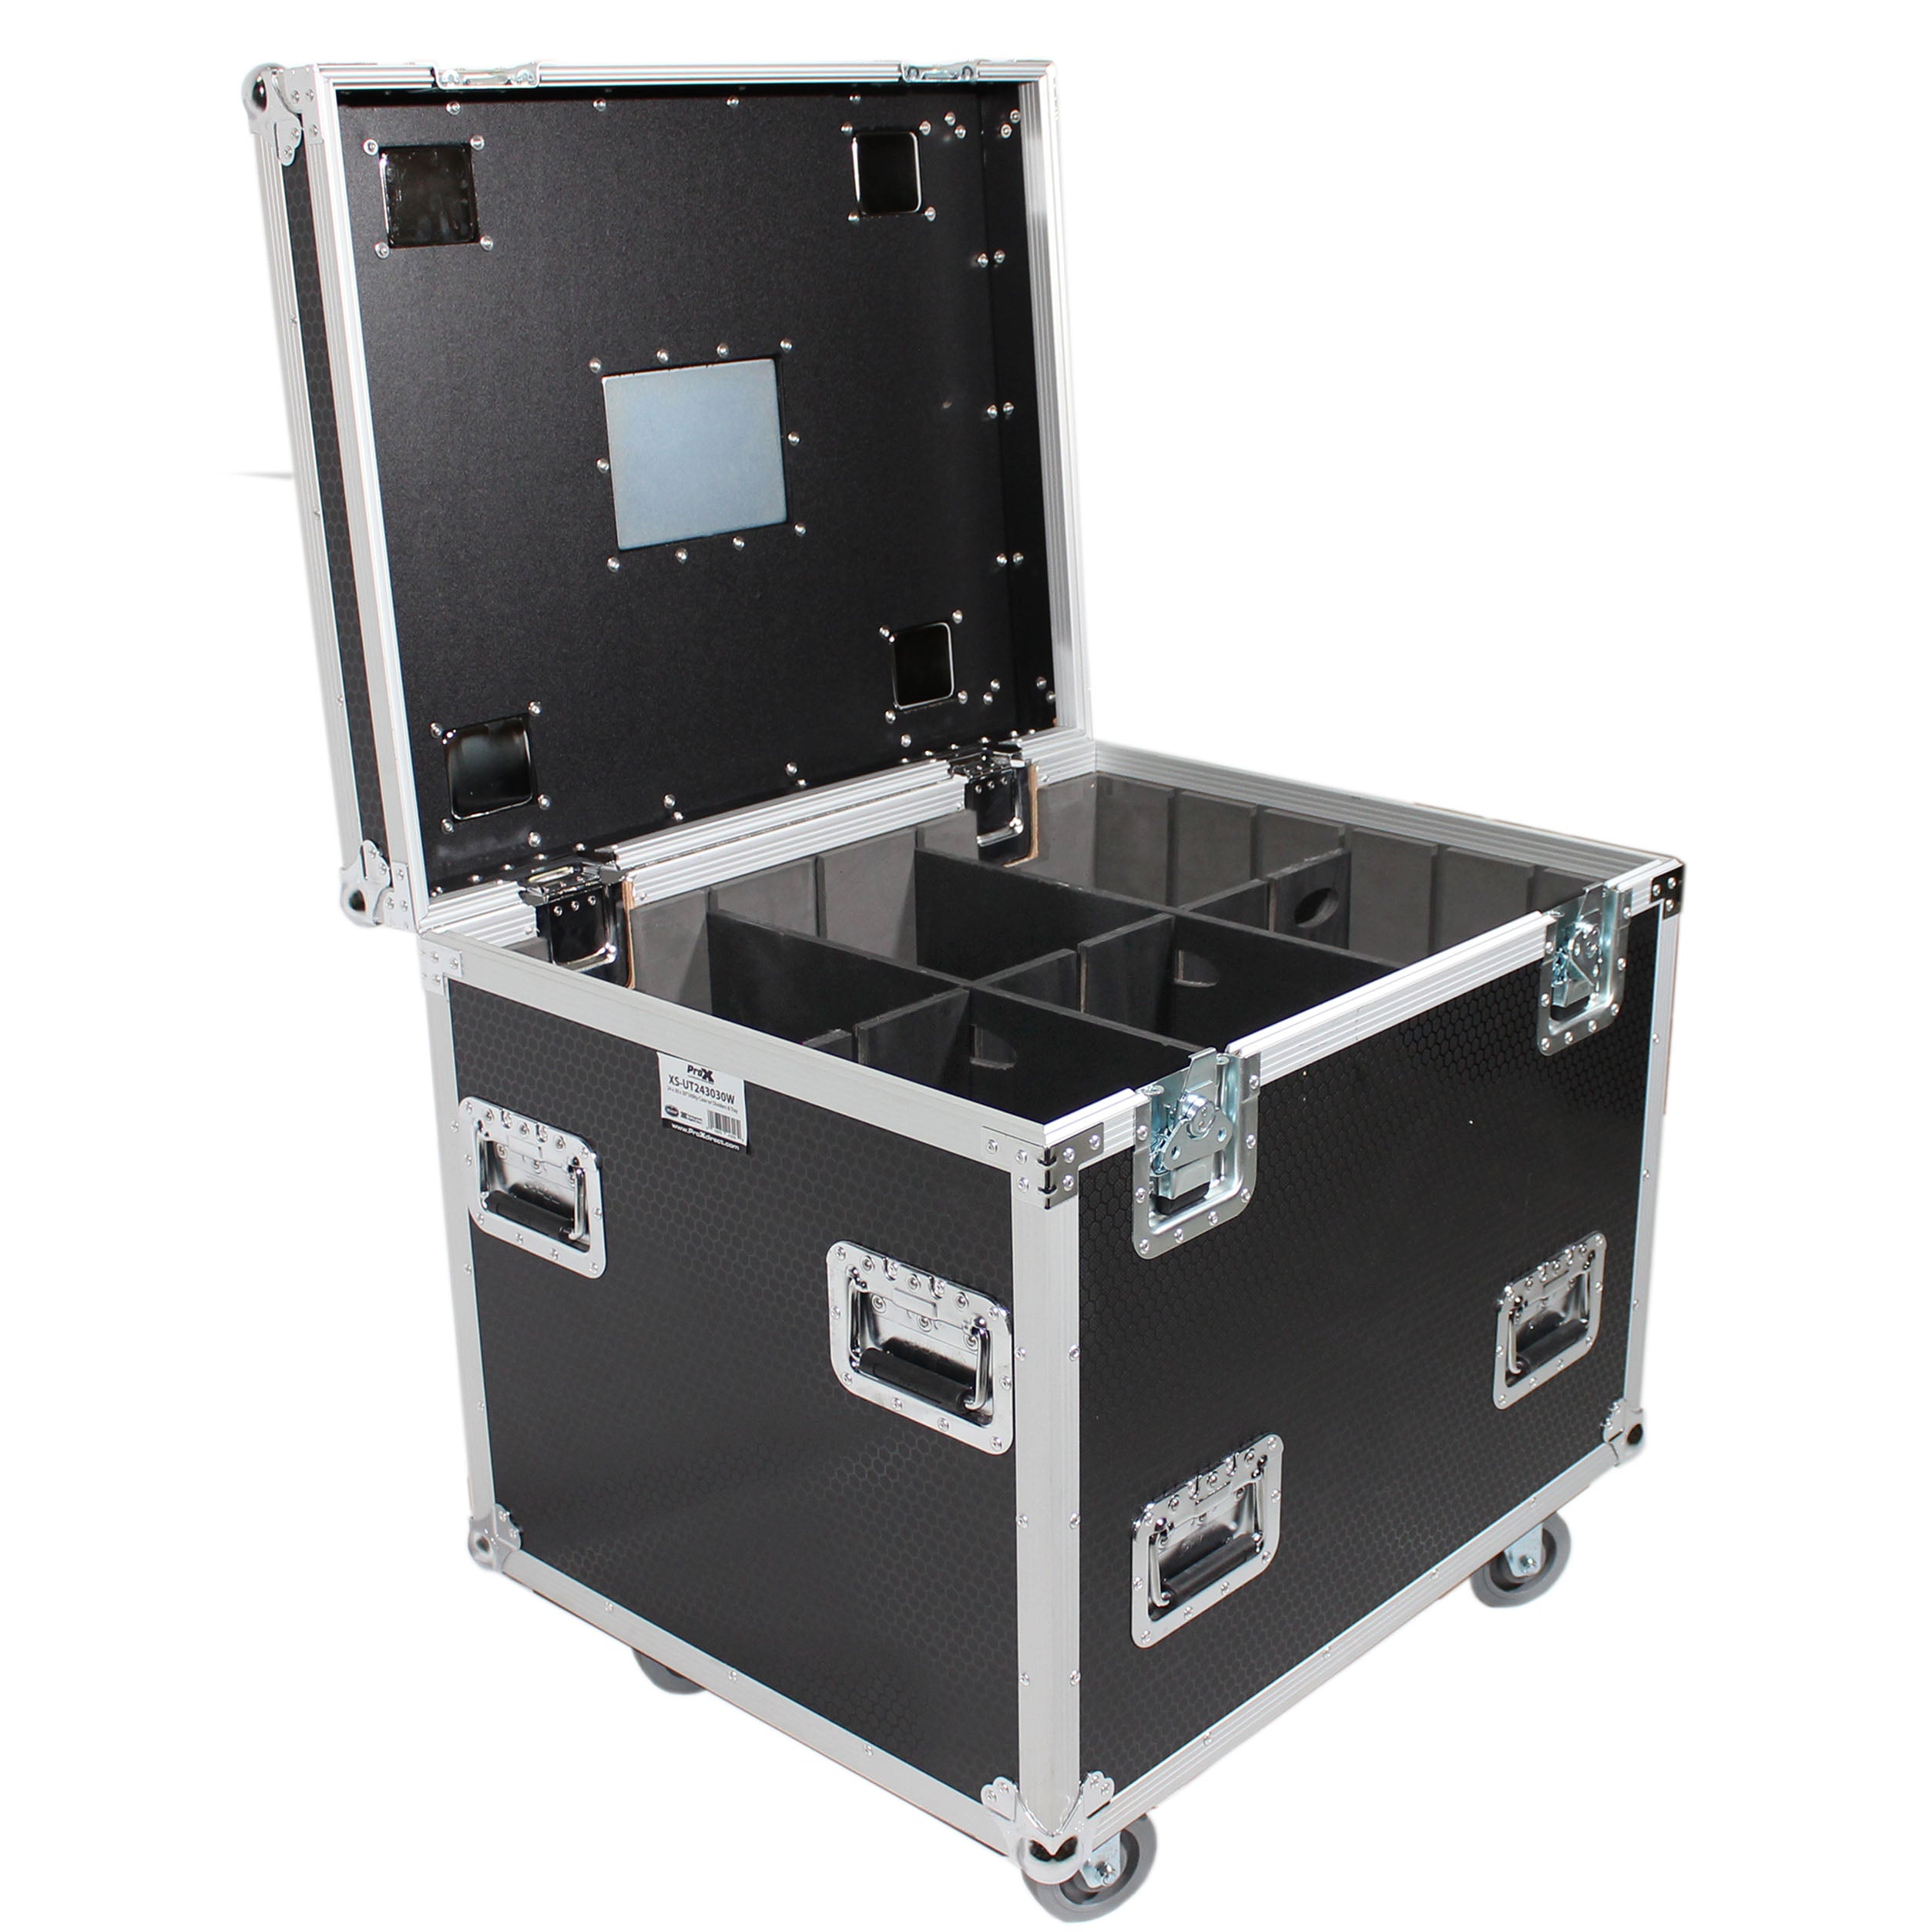 Pro X TruckPax Utility ATA Flight Case Truck Storage Road Case with Dividers Tray and 4" in casters – 24"x30"x30" Ext XS-UTL243030WMK2